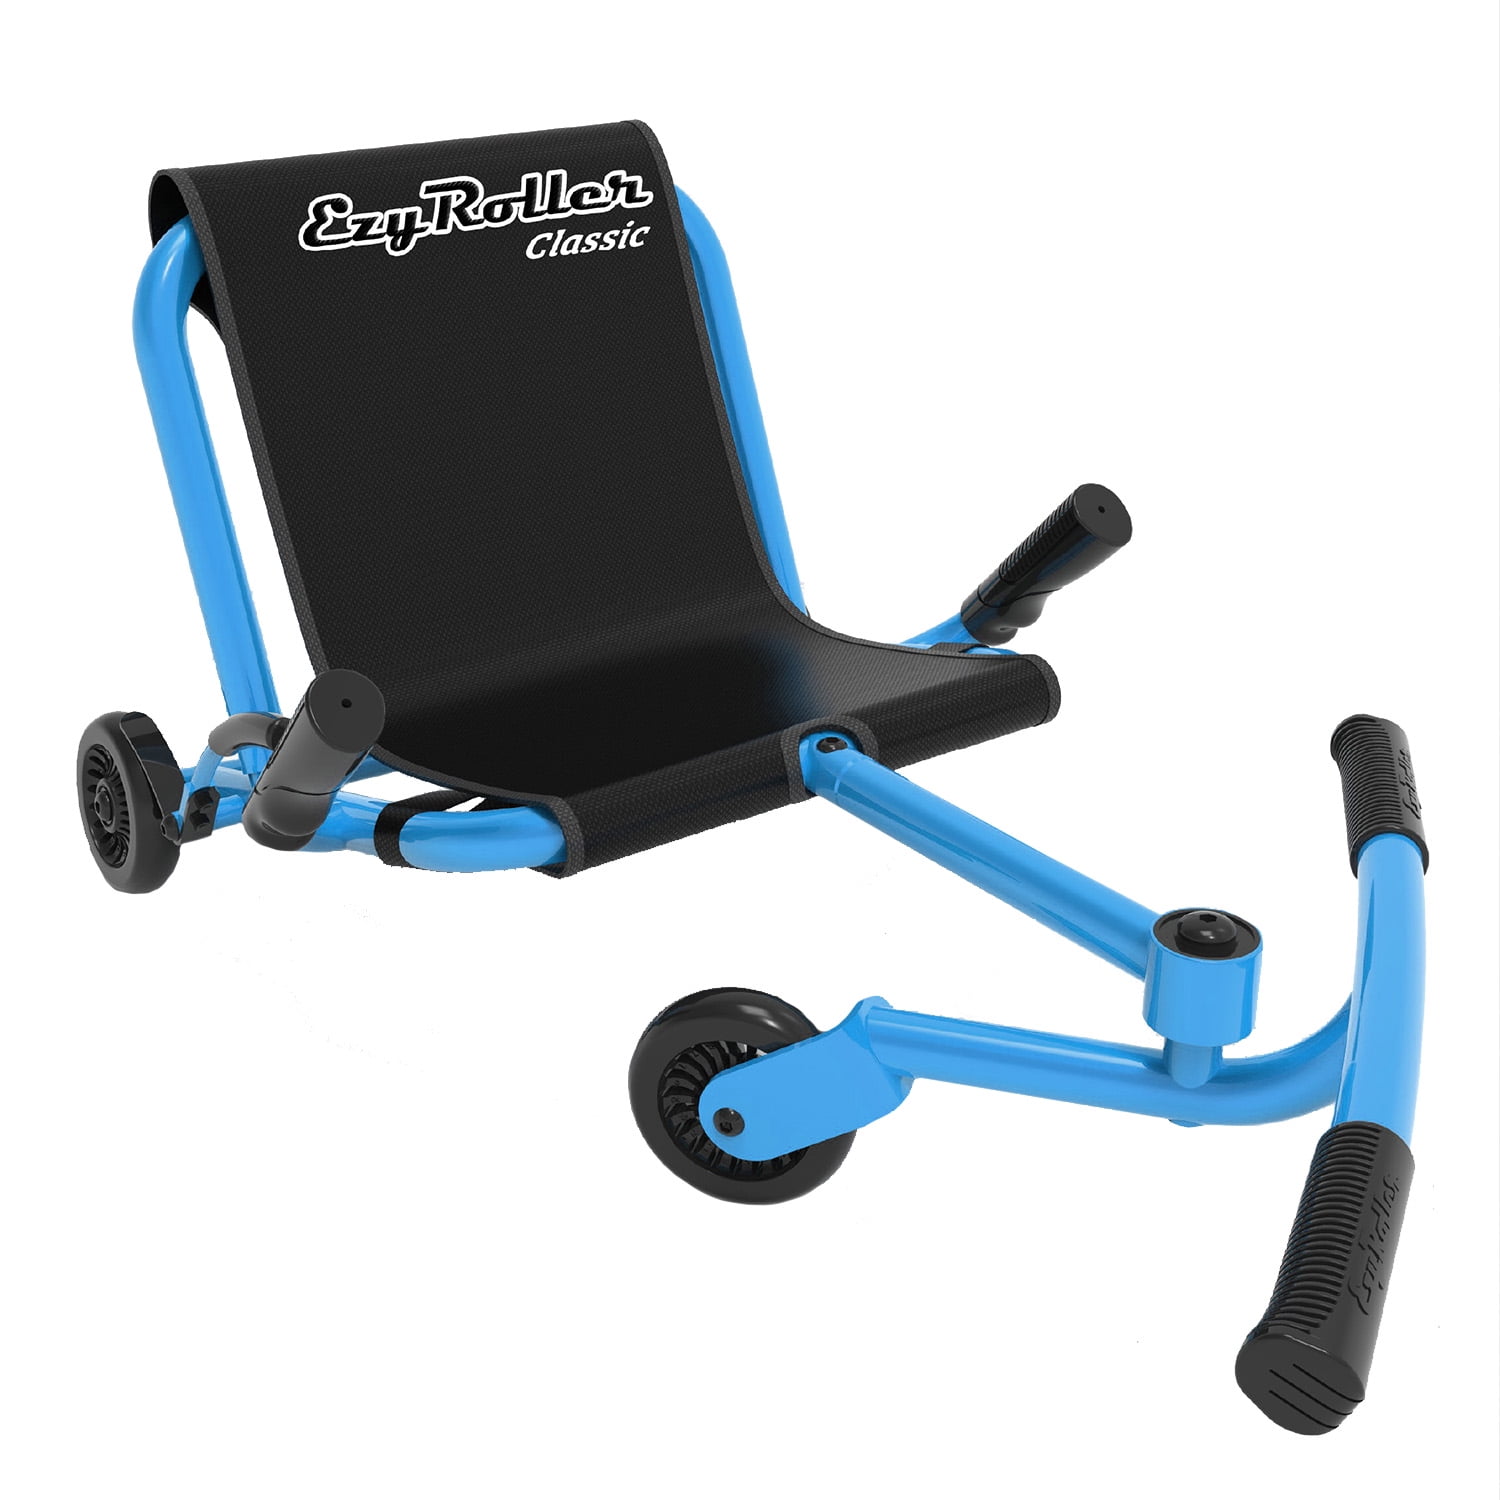 Black Friday Ezy Roller - Ultimate Riding Machine - Blue from Ezyroller